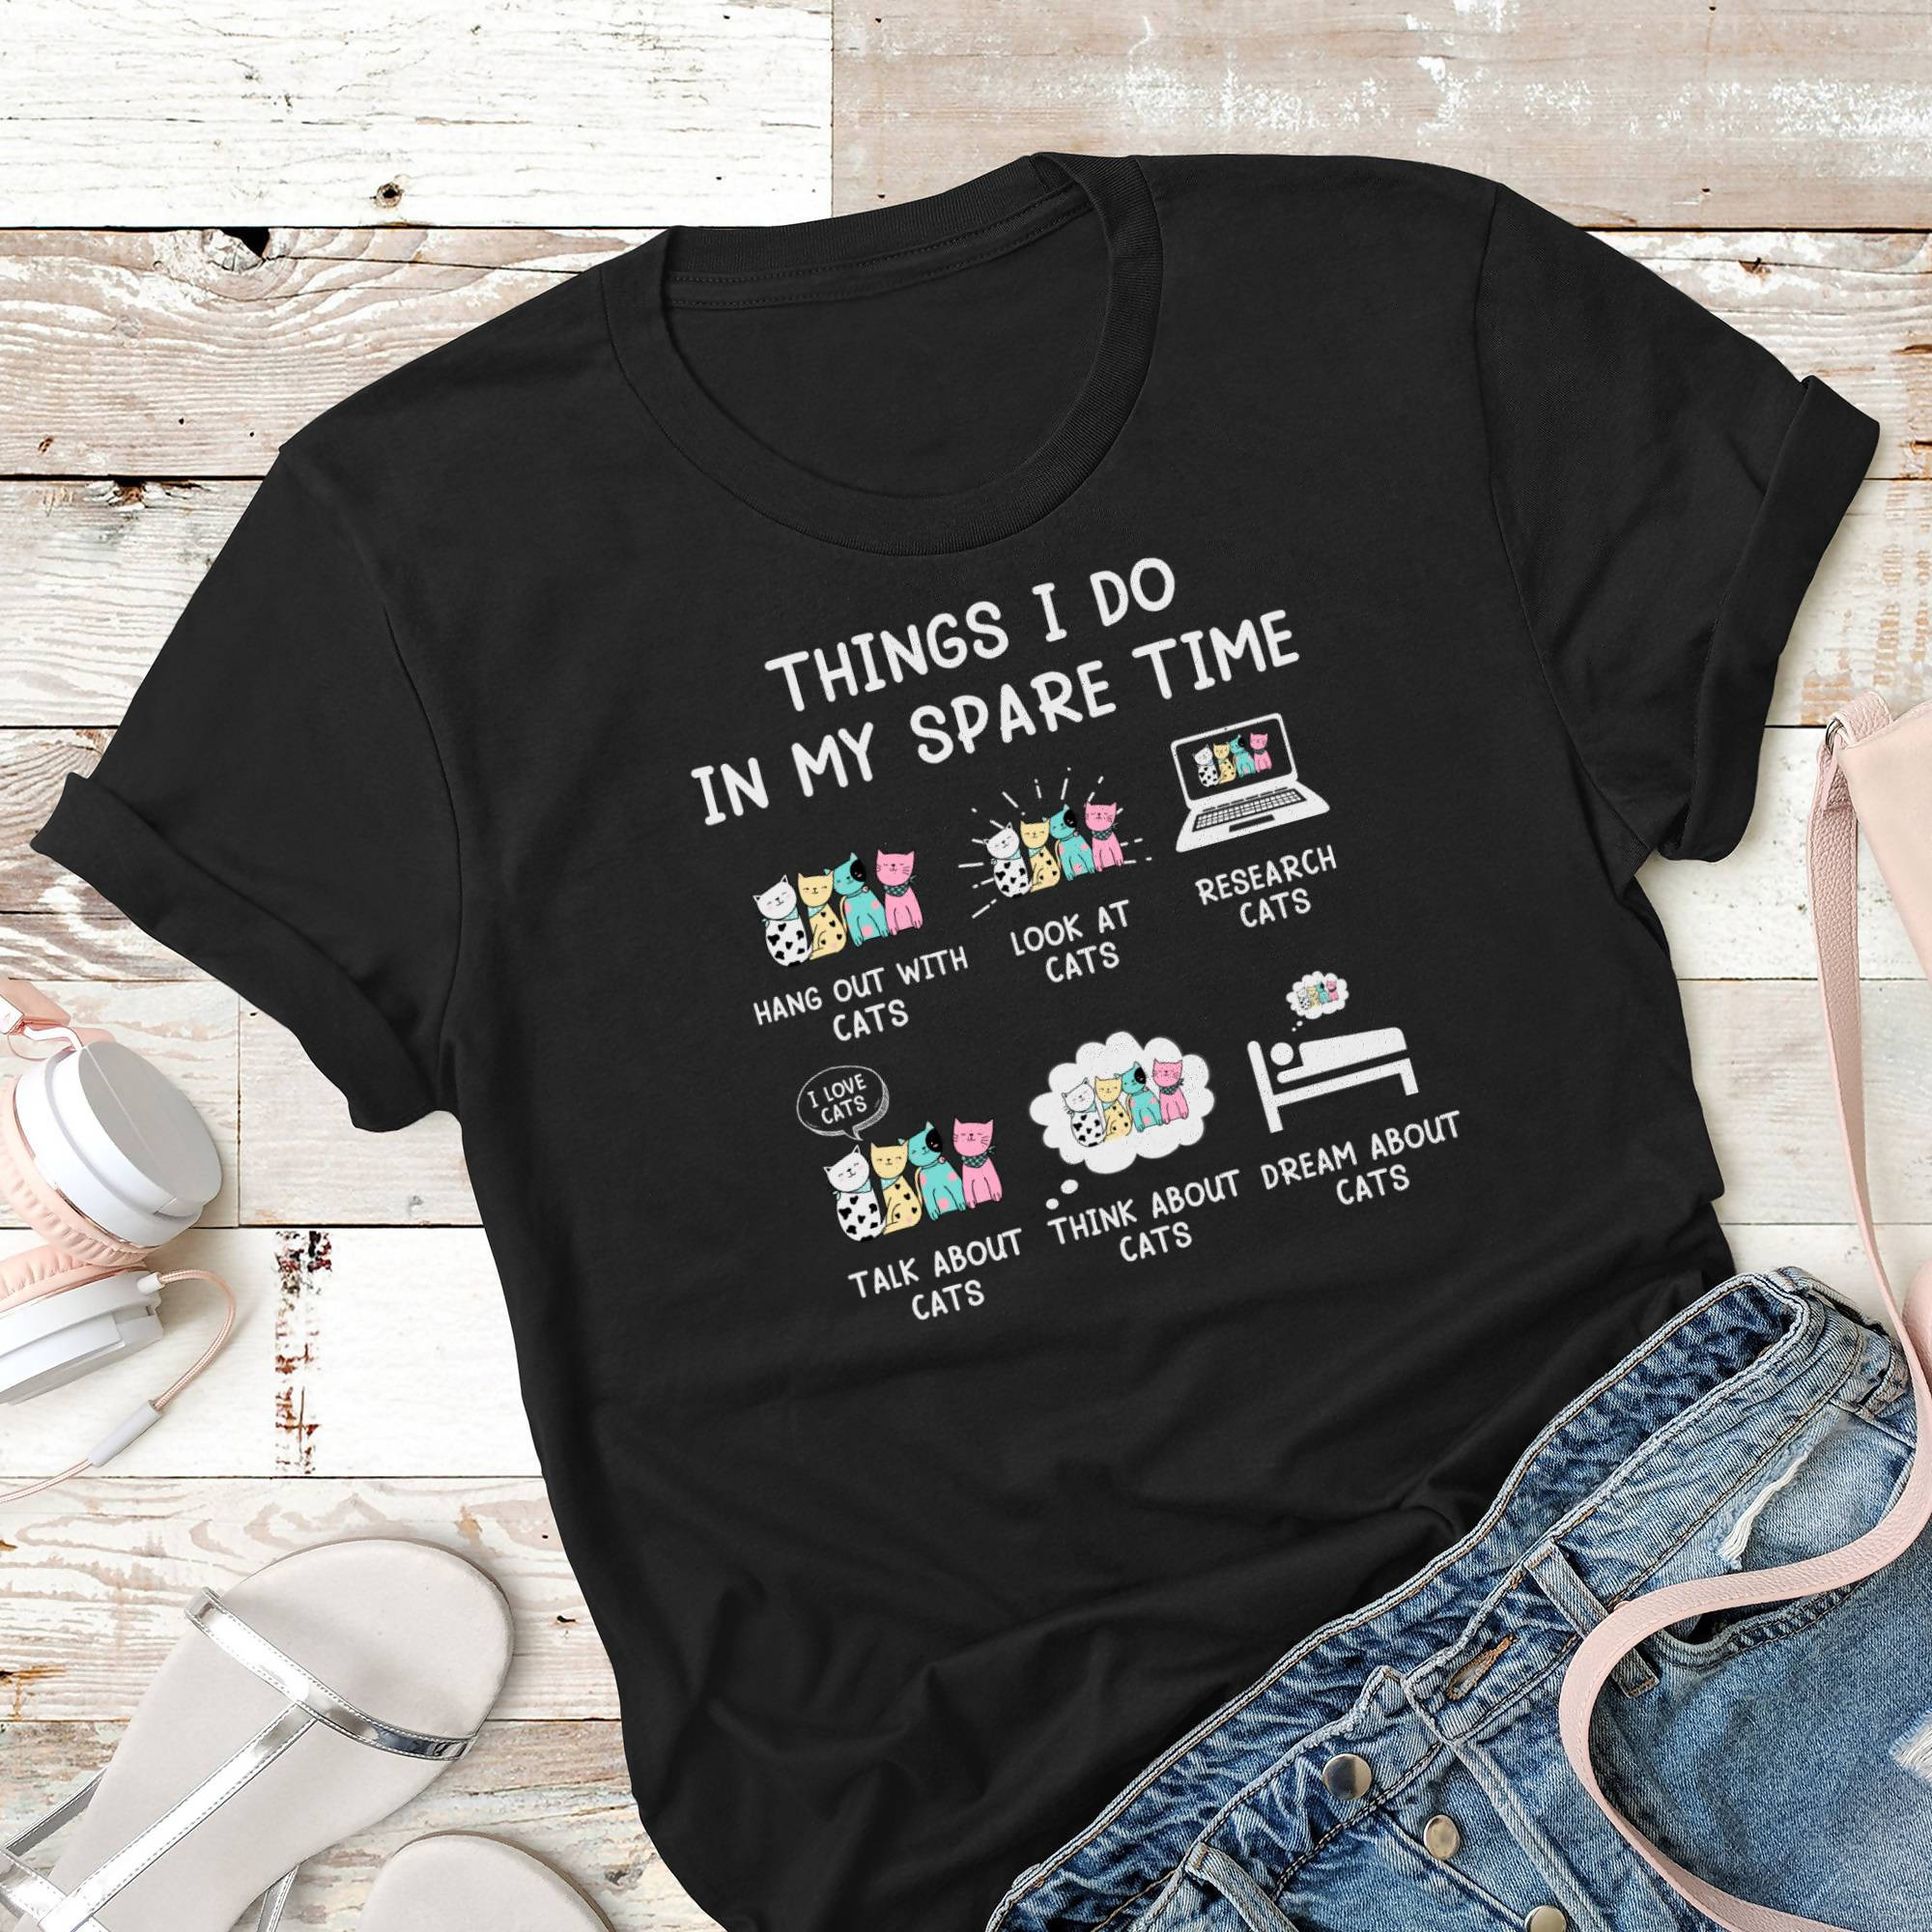 Things I Do In My Spare Time, Cats Unisex T-Shirts, Tee, Custom Shirt, Custom T-Shirt, Personalized T-Shirt